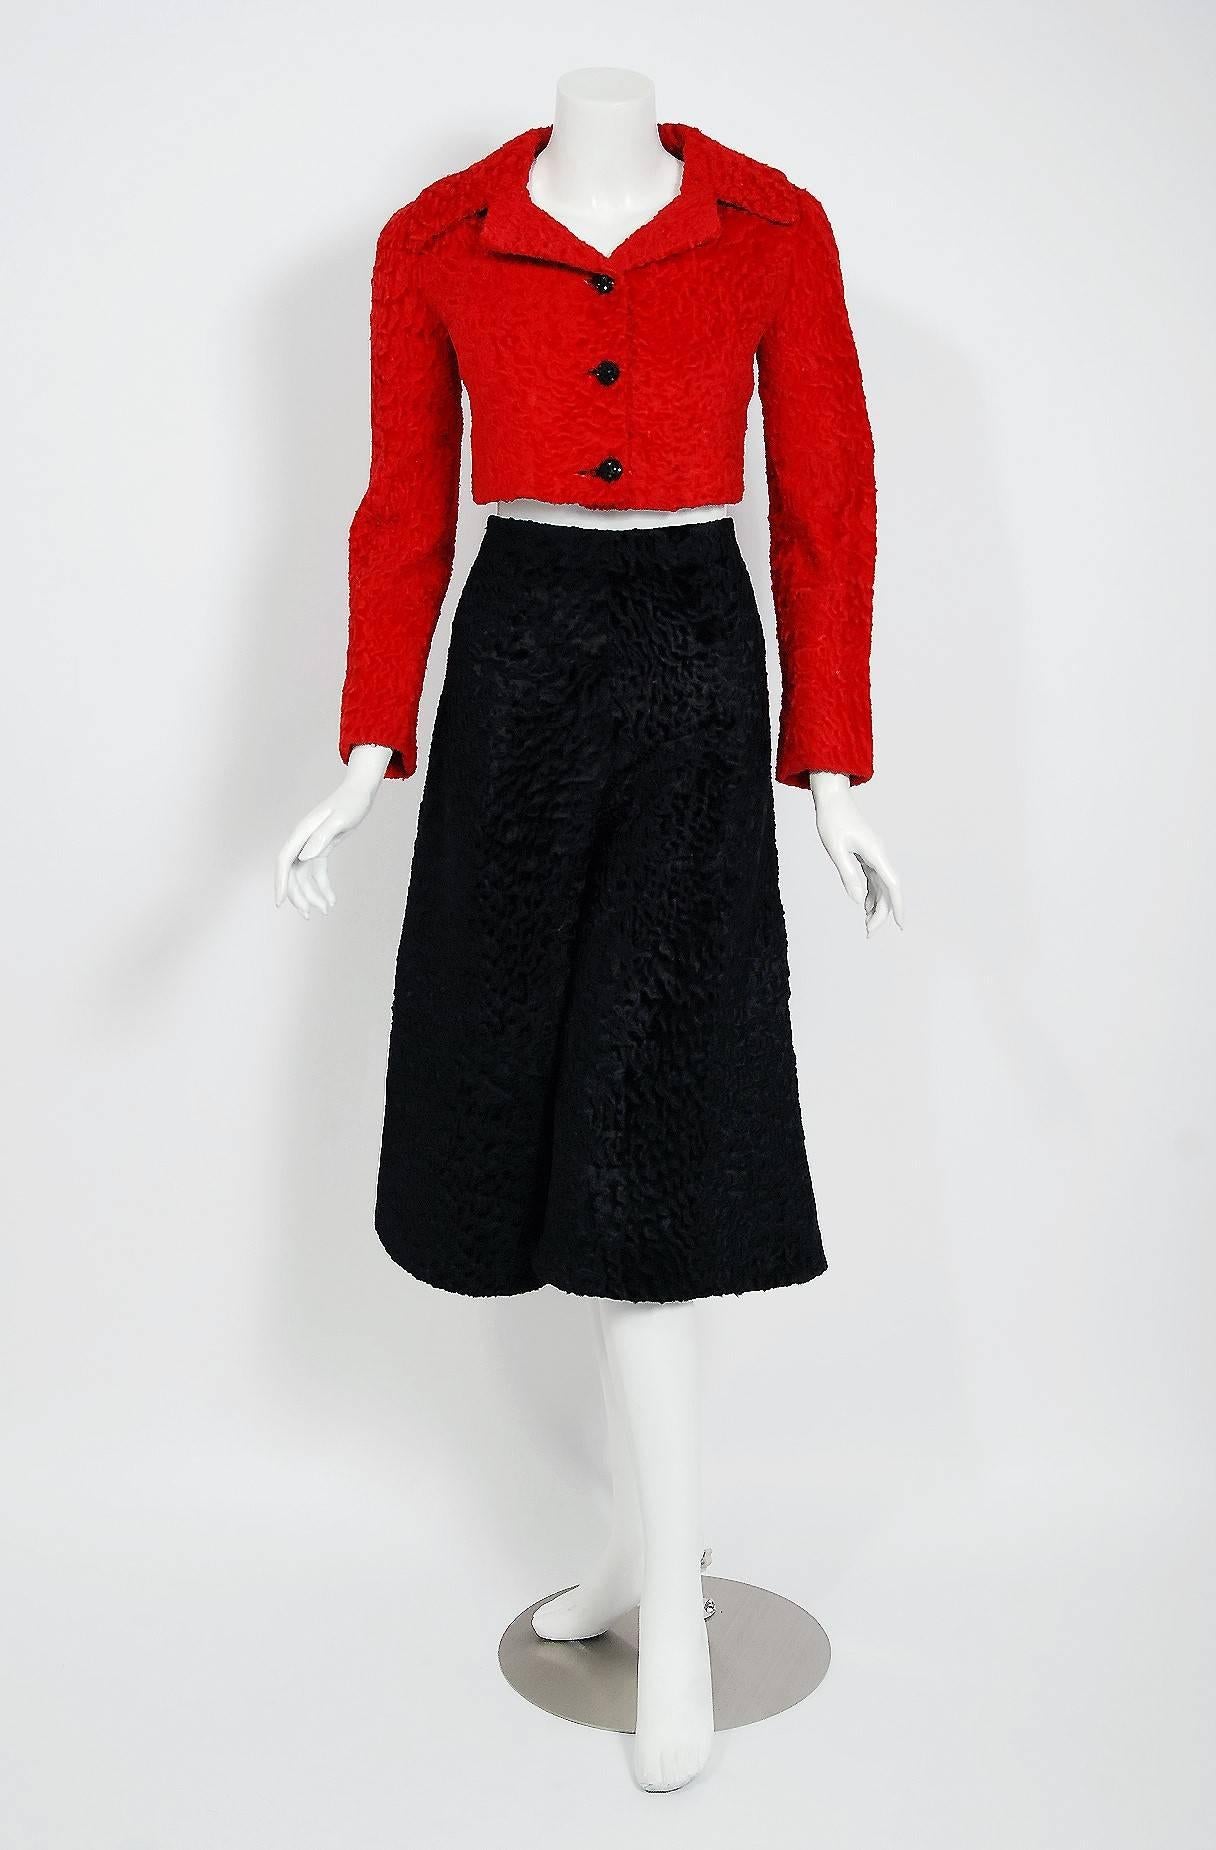 The House of Dior has been an enduring icon of Haute Couture. When the talented Marc Bohan took over as head designer in 1960, he continued the Dior tradition of elegant design. This gorgeous ruby-red and black broadtail fur ensemble dating back to